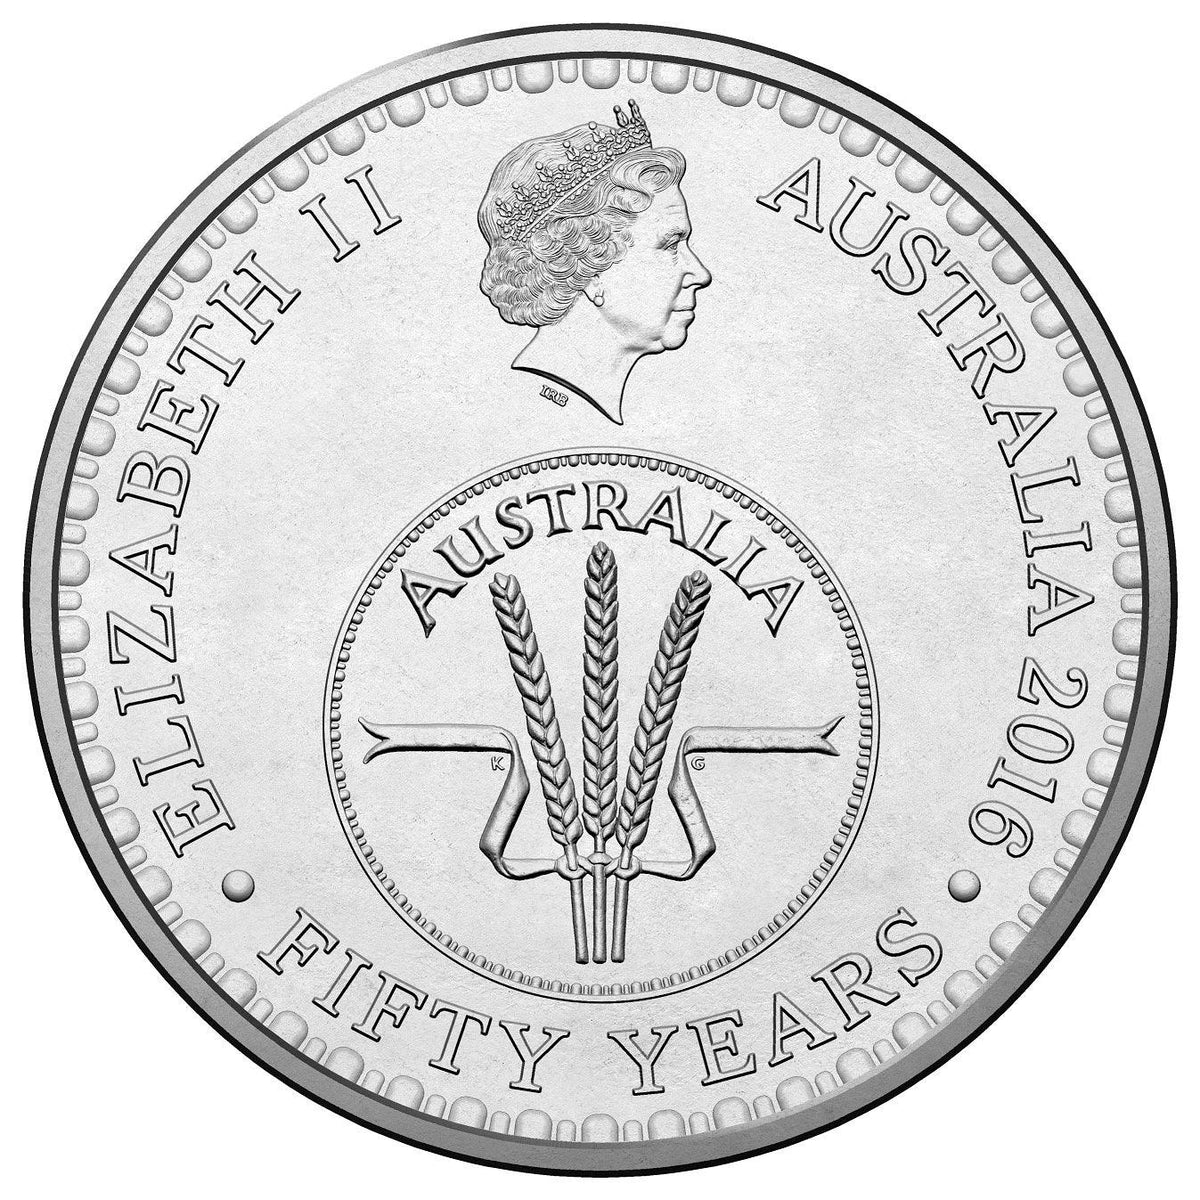 2016 Australian 10 Cent Coin - 50th Anniversary of Decimal Currency